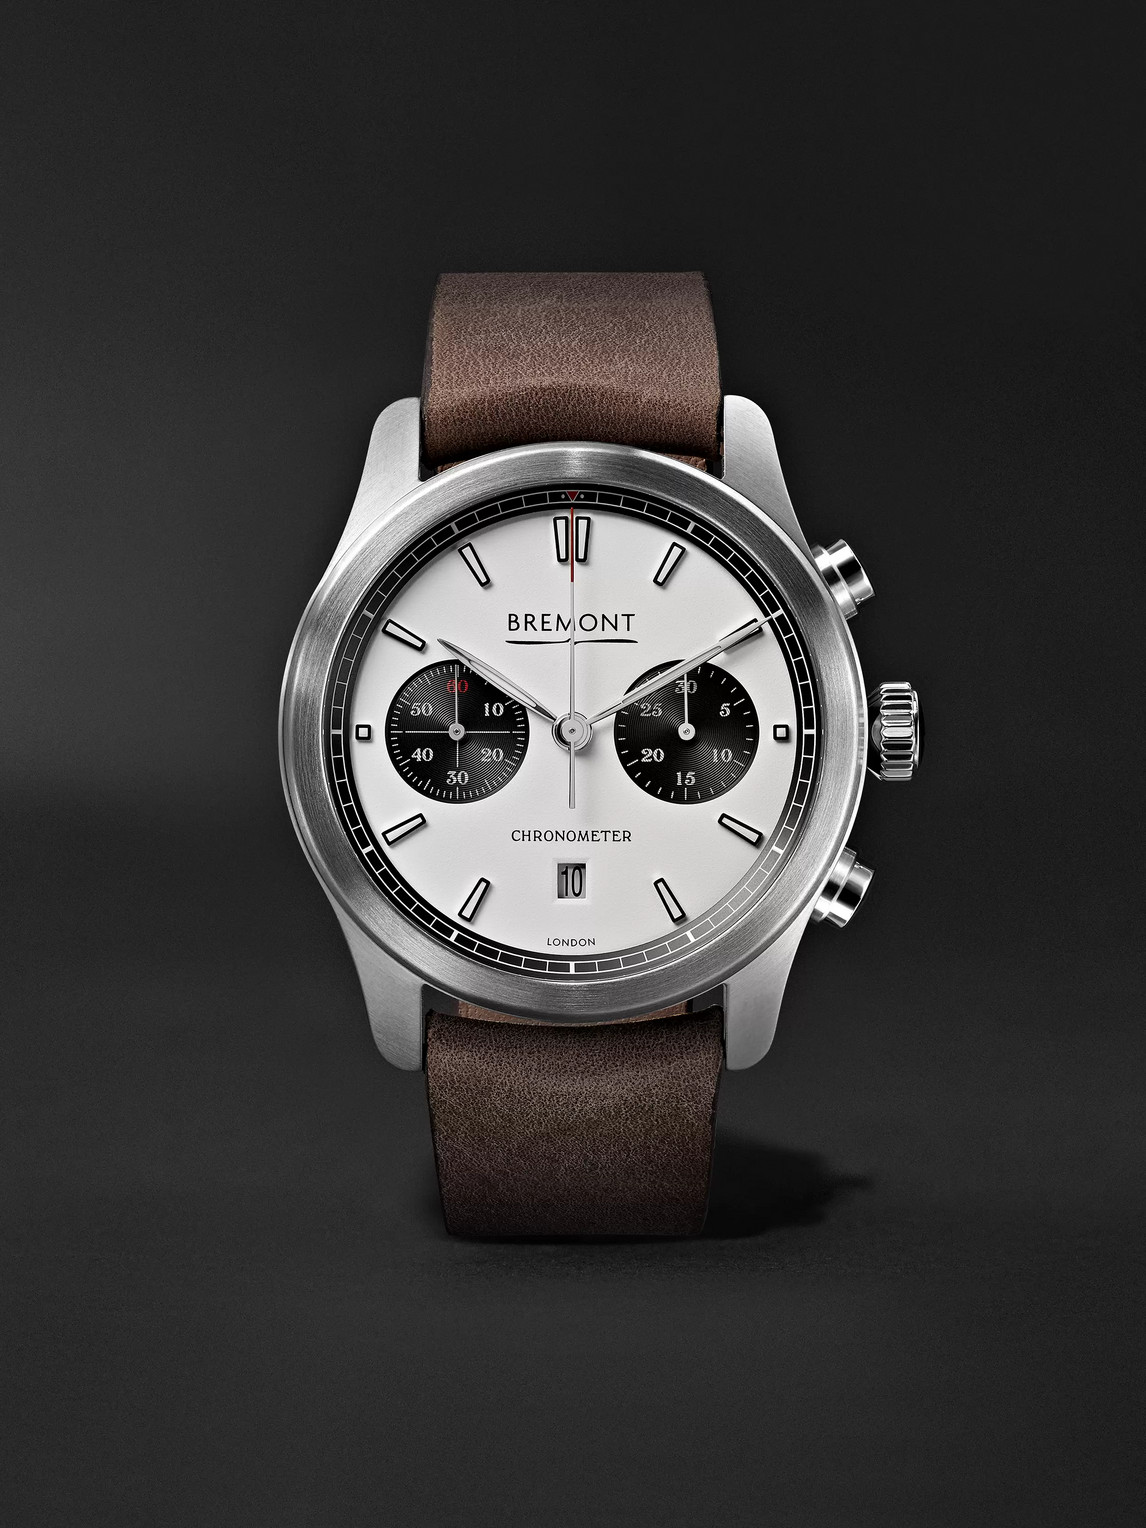 Bremont Alt1-c White-black Automatic Chronograph 43mm Stainless Steel And Leather Watch, Ref. No. Alt1-c/wh-